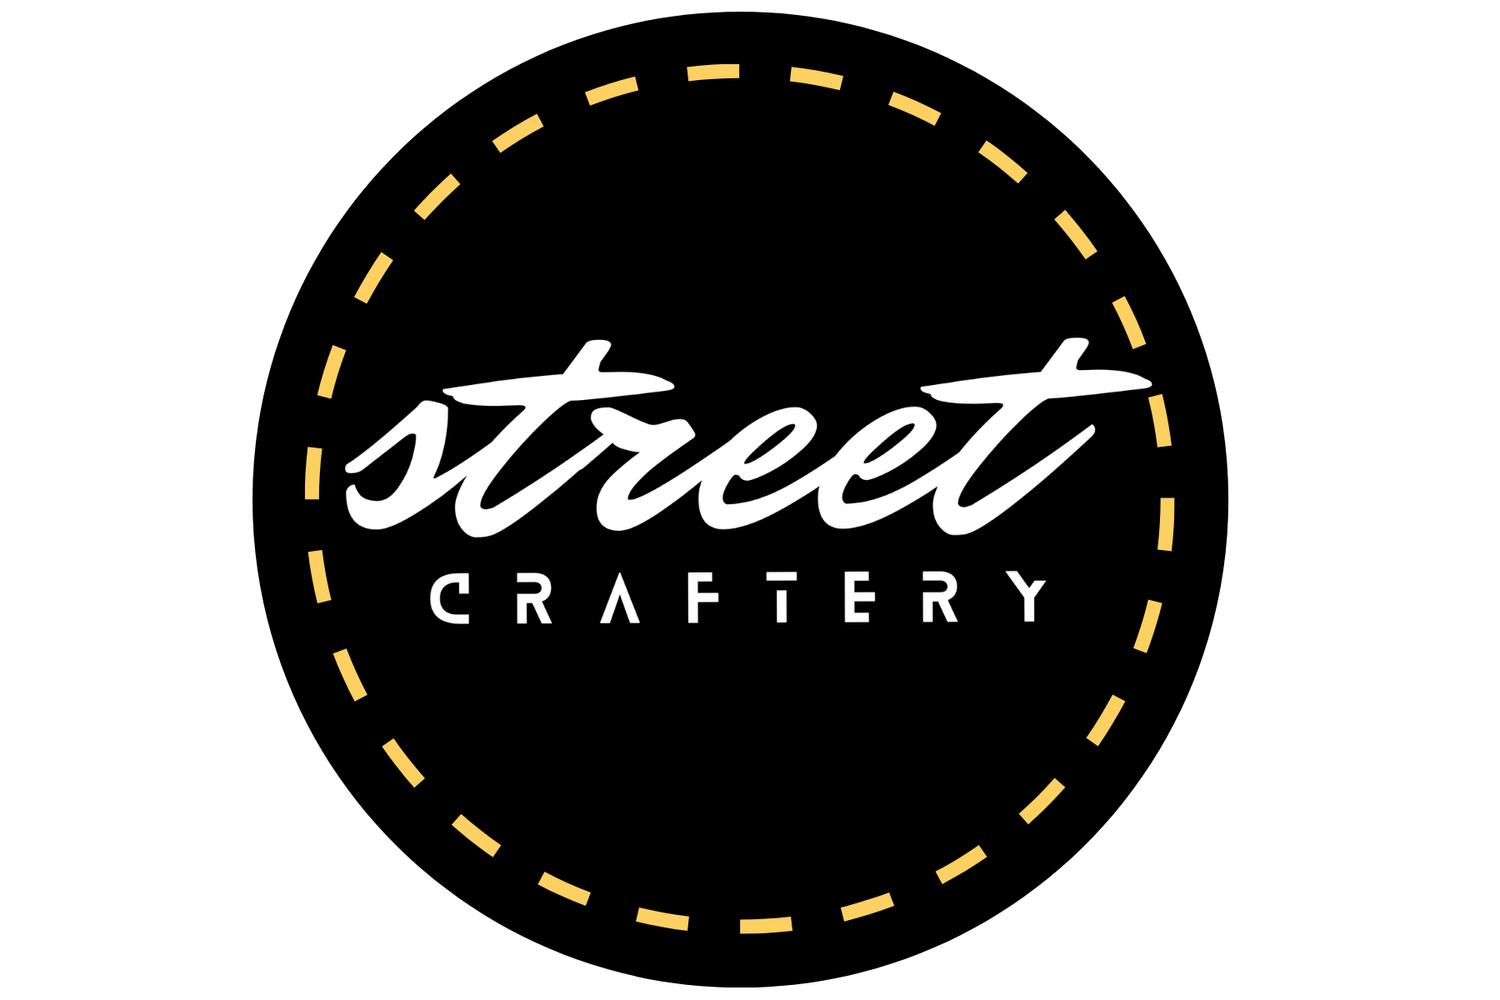 Street Craftery